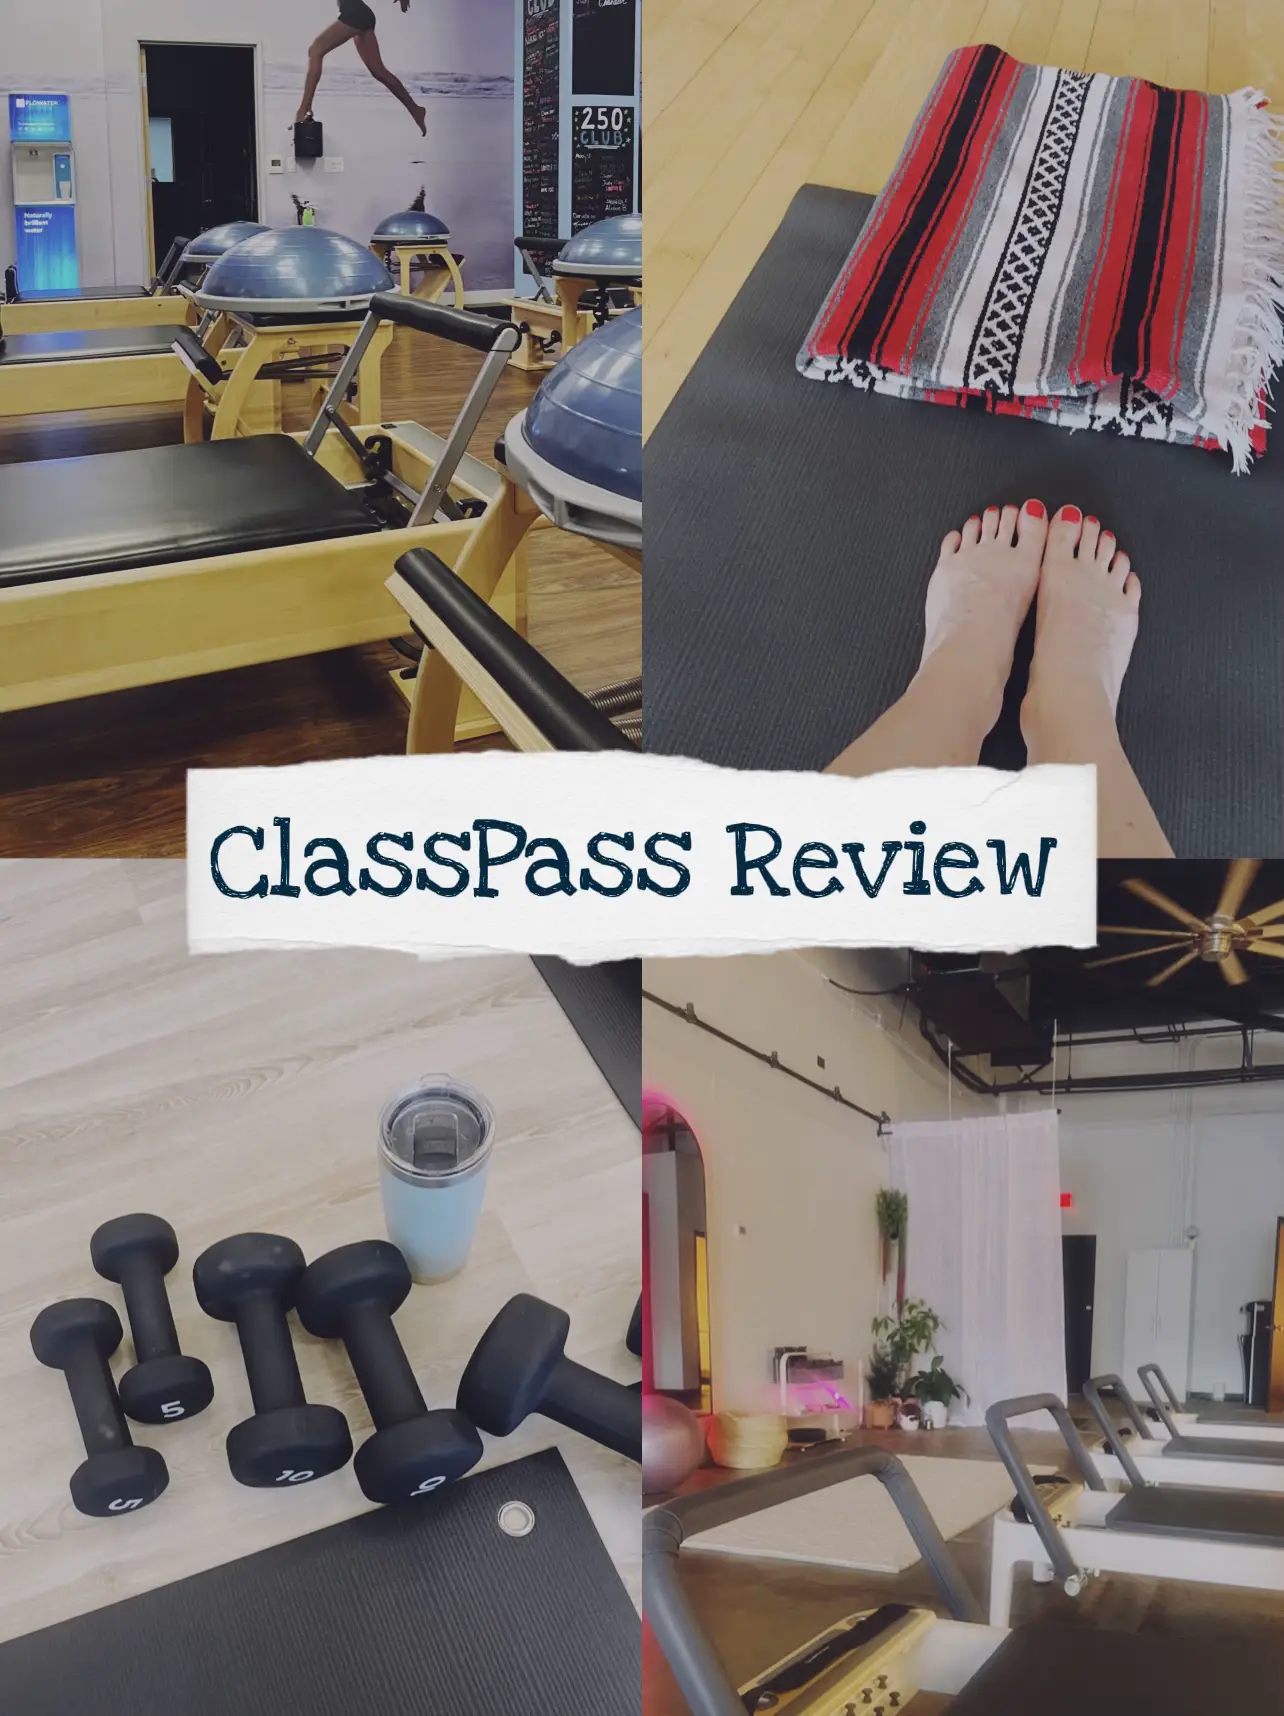 The Bar Method - Noho: Read Reviews and Book Classes on ClassPass